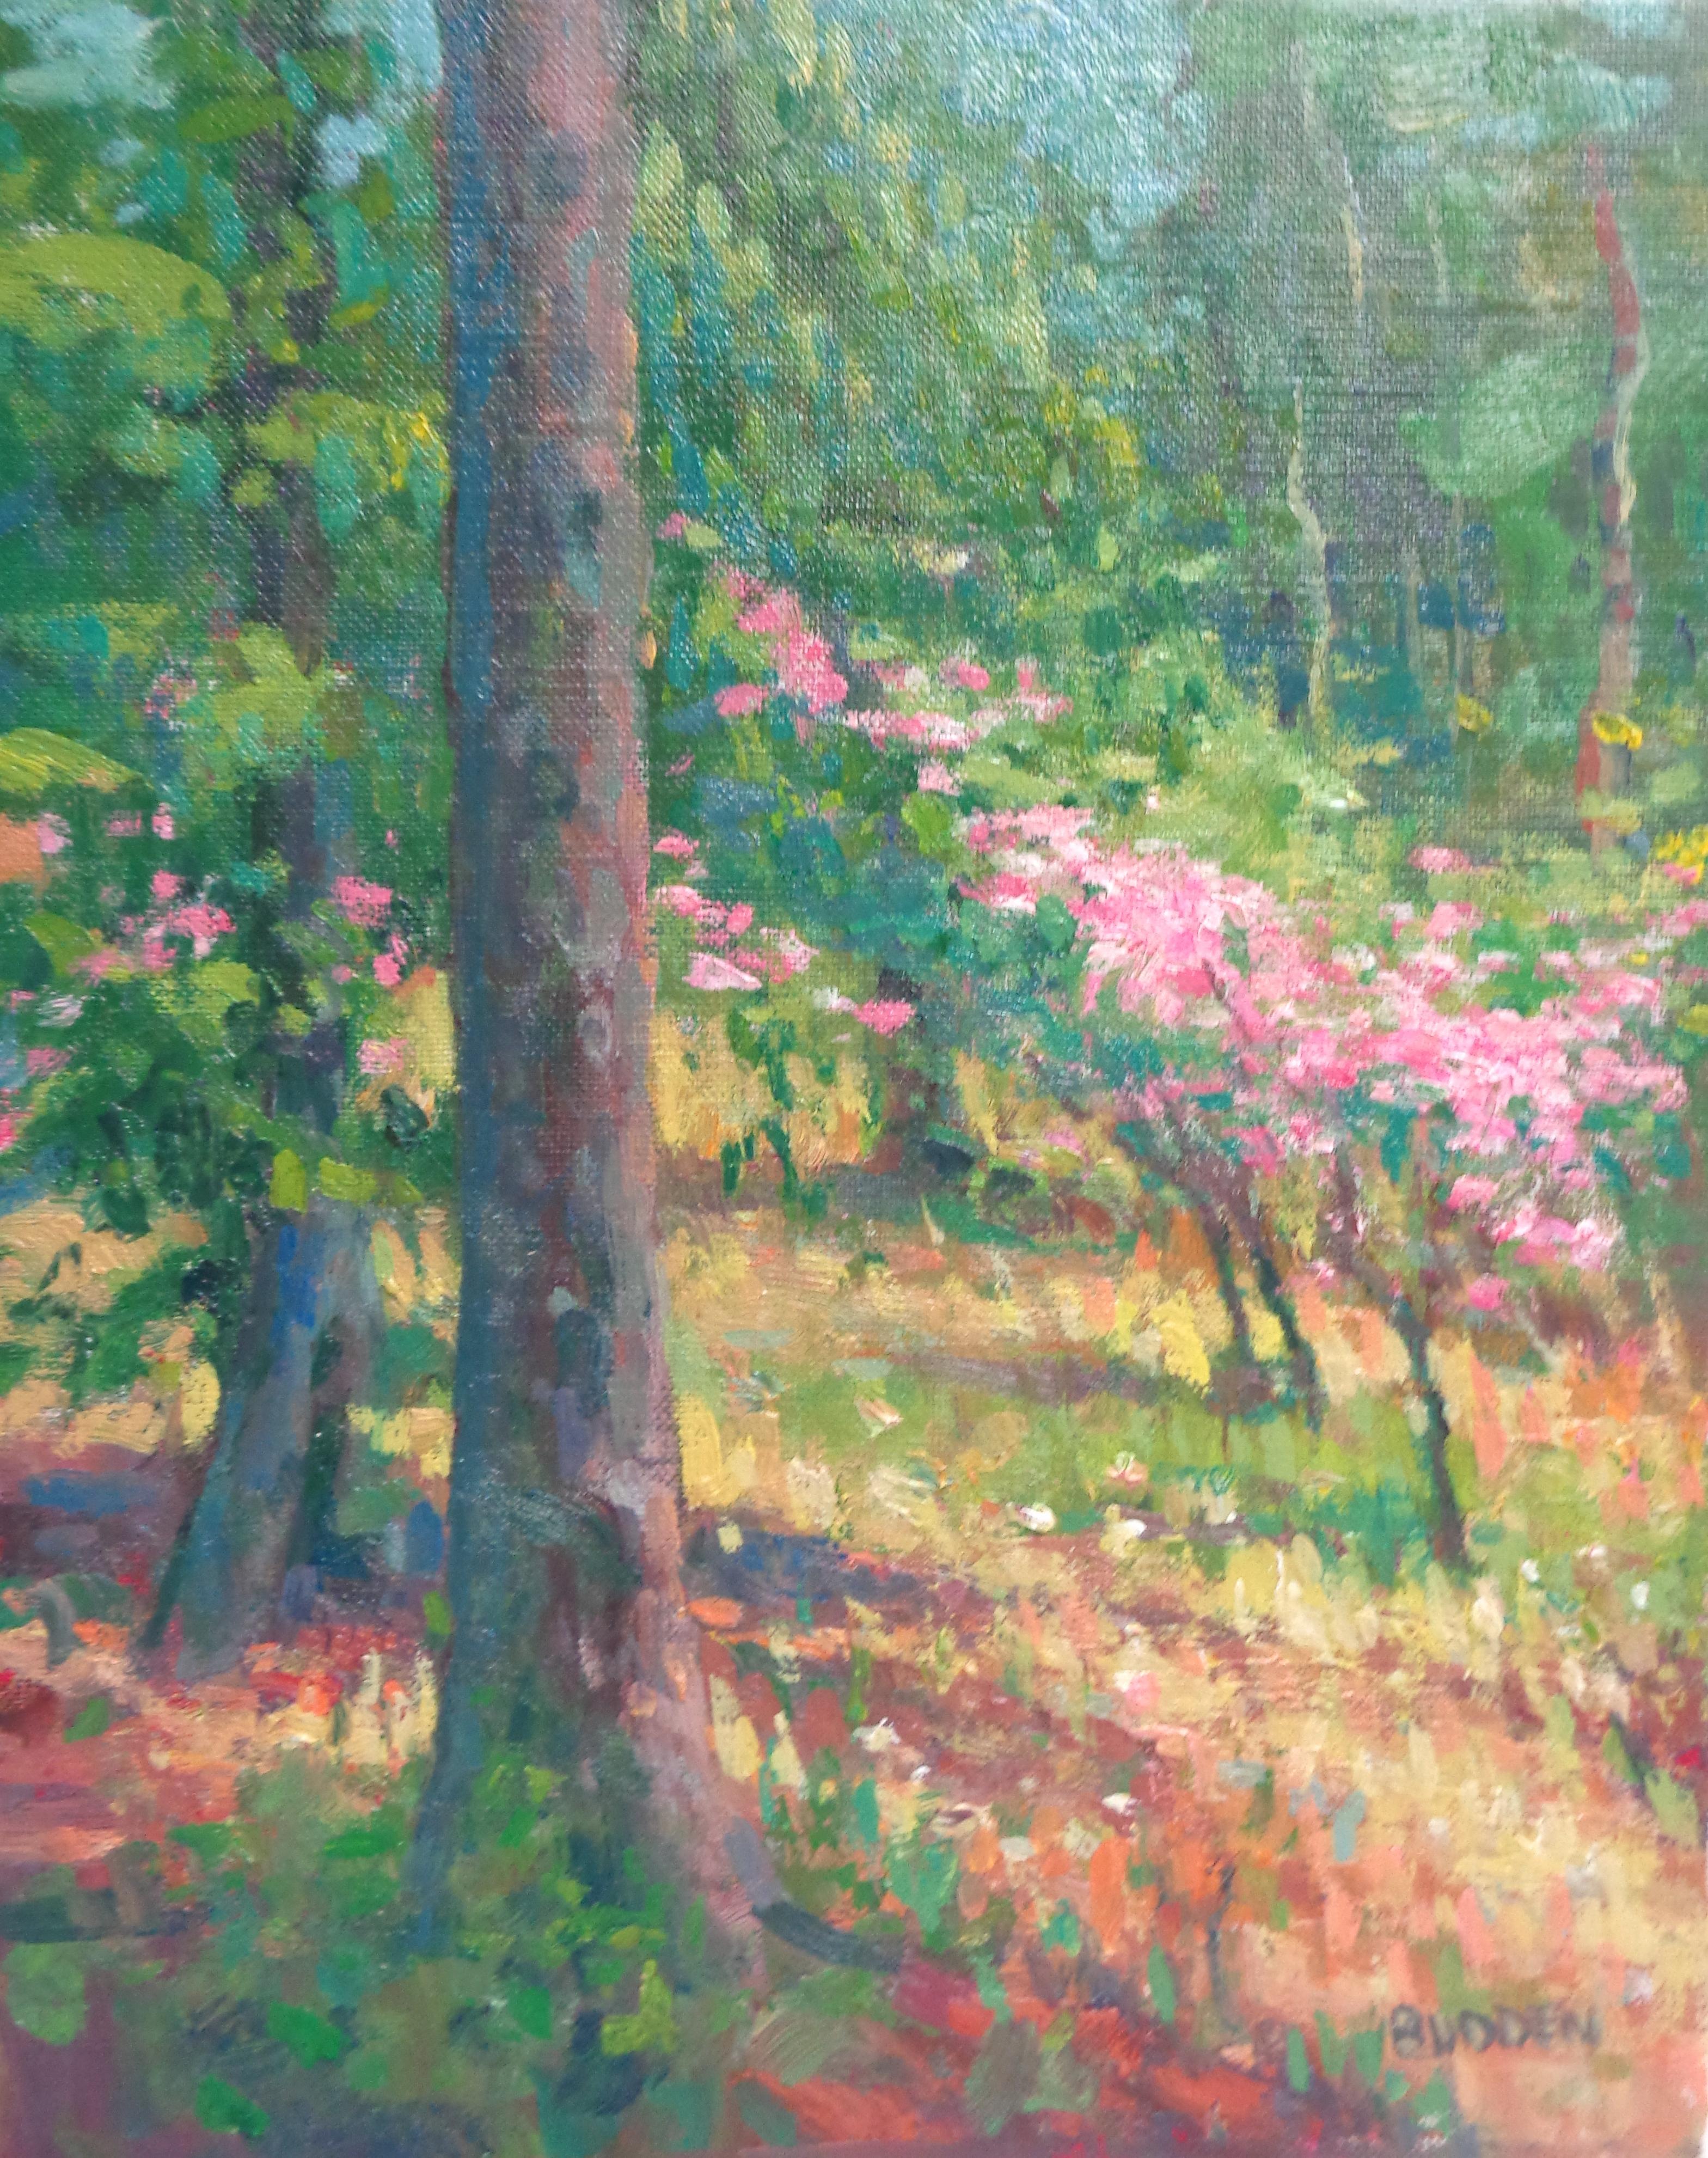  Impressionistic Floral Landscape Oil Painting by Michael Budden Early Spring For Sale 2